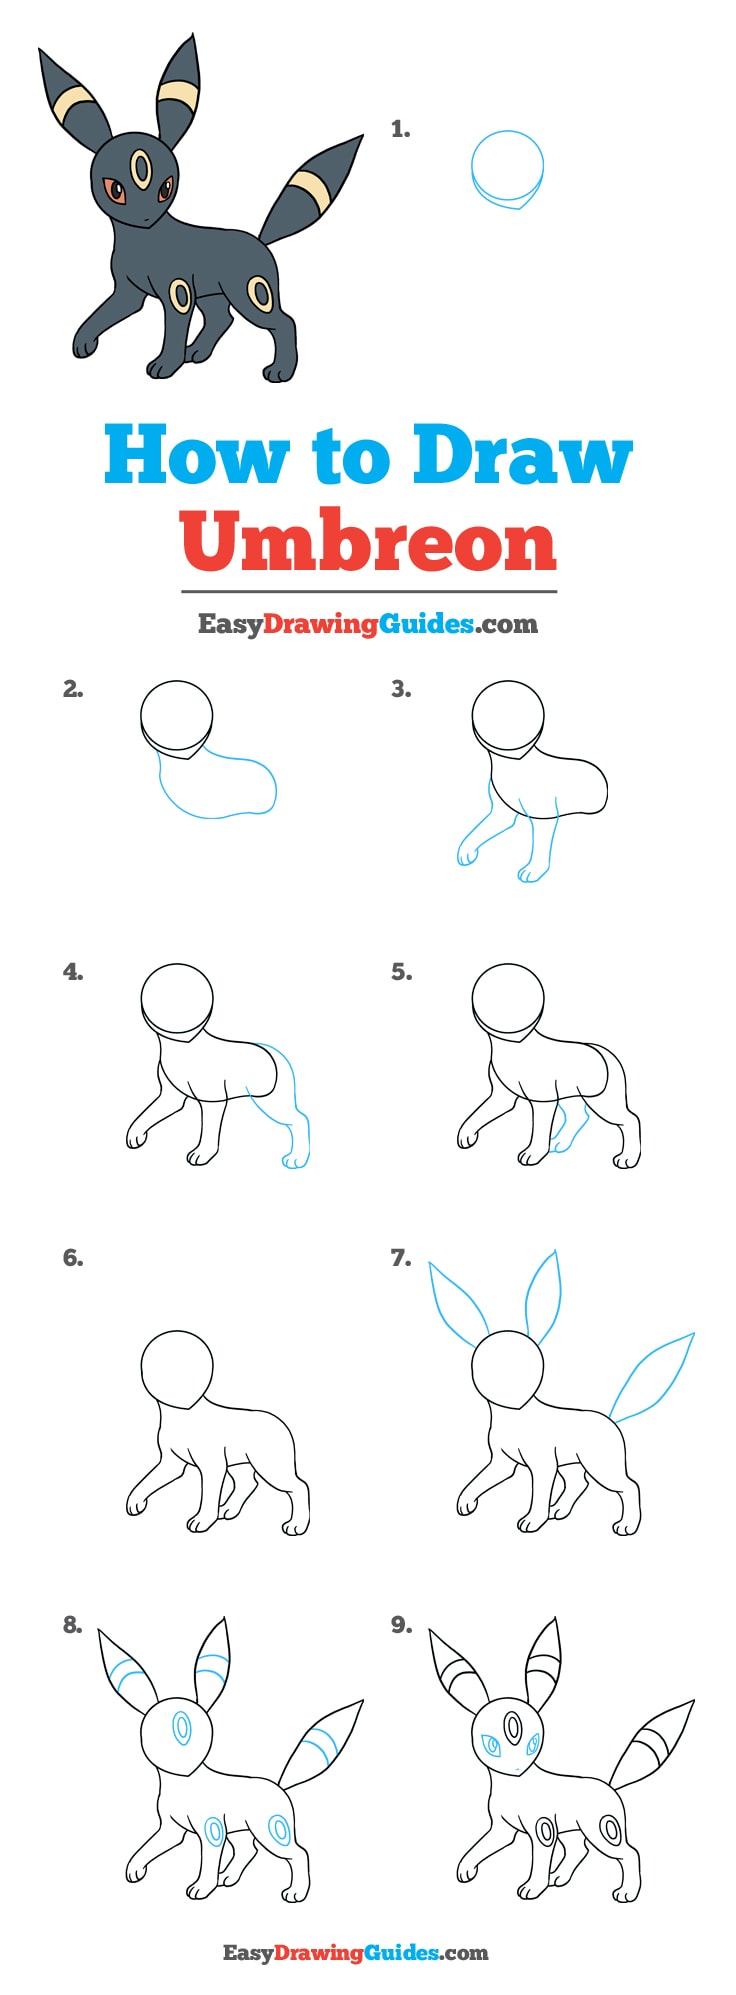 Easy Drawing Guides on X: Umbreon Pokémon Drawing Lesson. Free